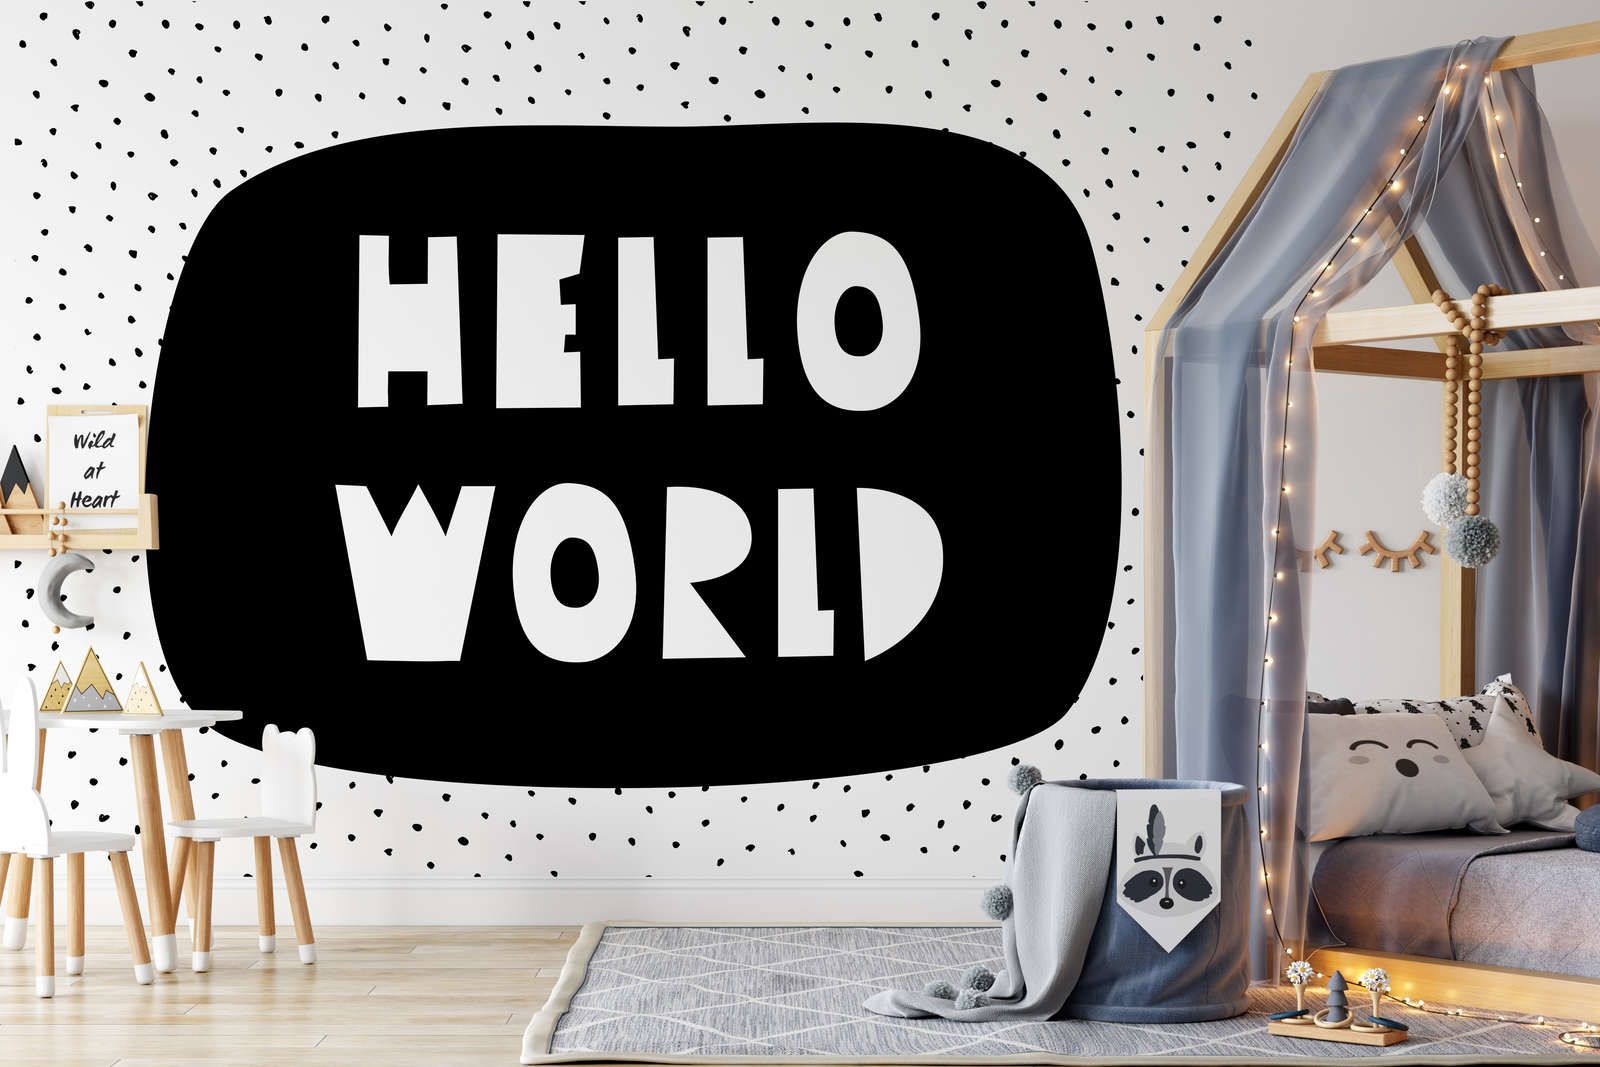             Photo wallpaper for children's room with lettering "Hello World" - Smooth & pearlescent fleece
        